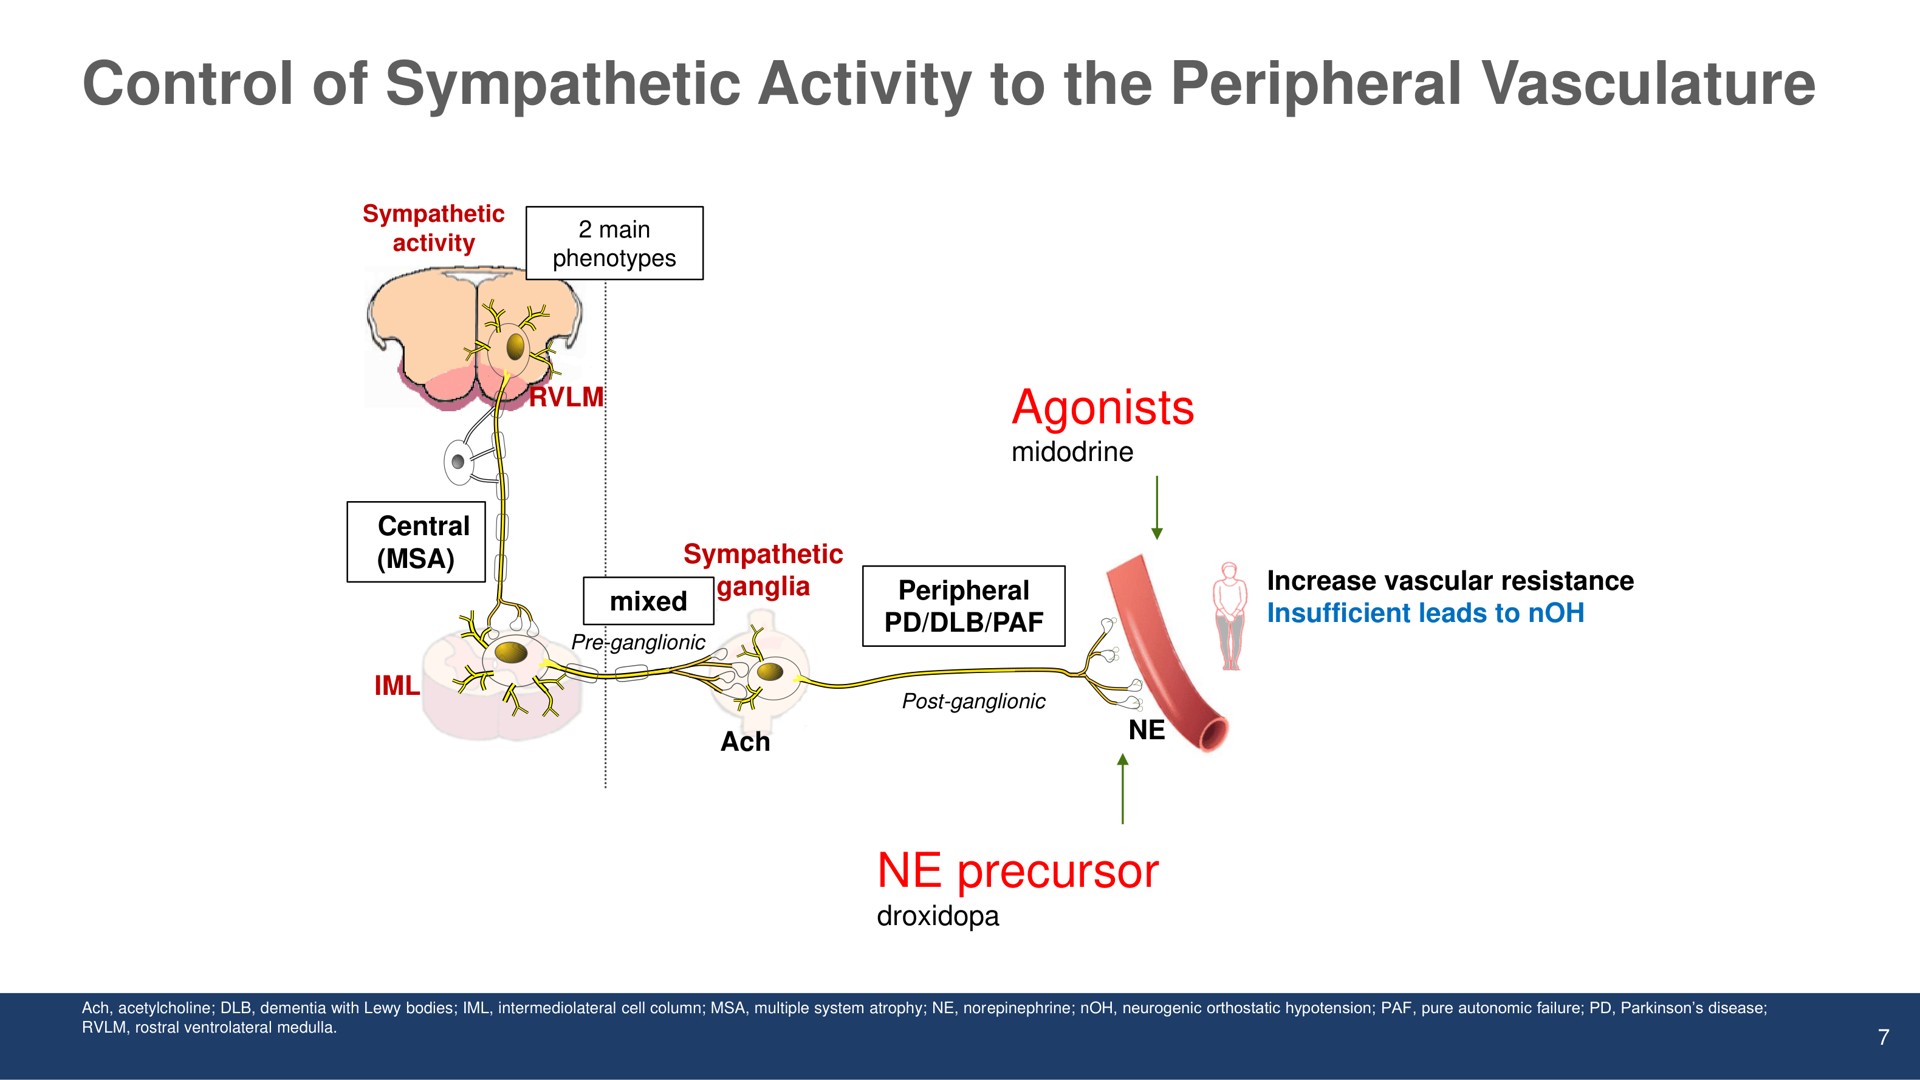 control of sympathetic activity to the peripheral vasculature | Theravance Biopharma